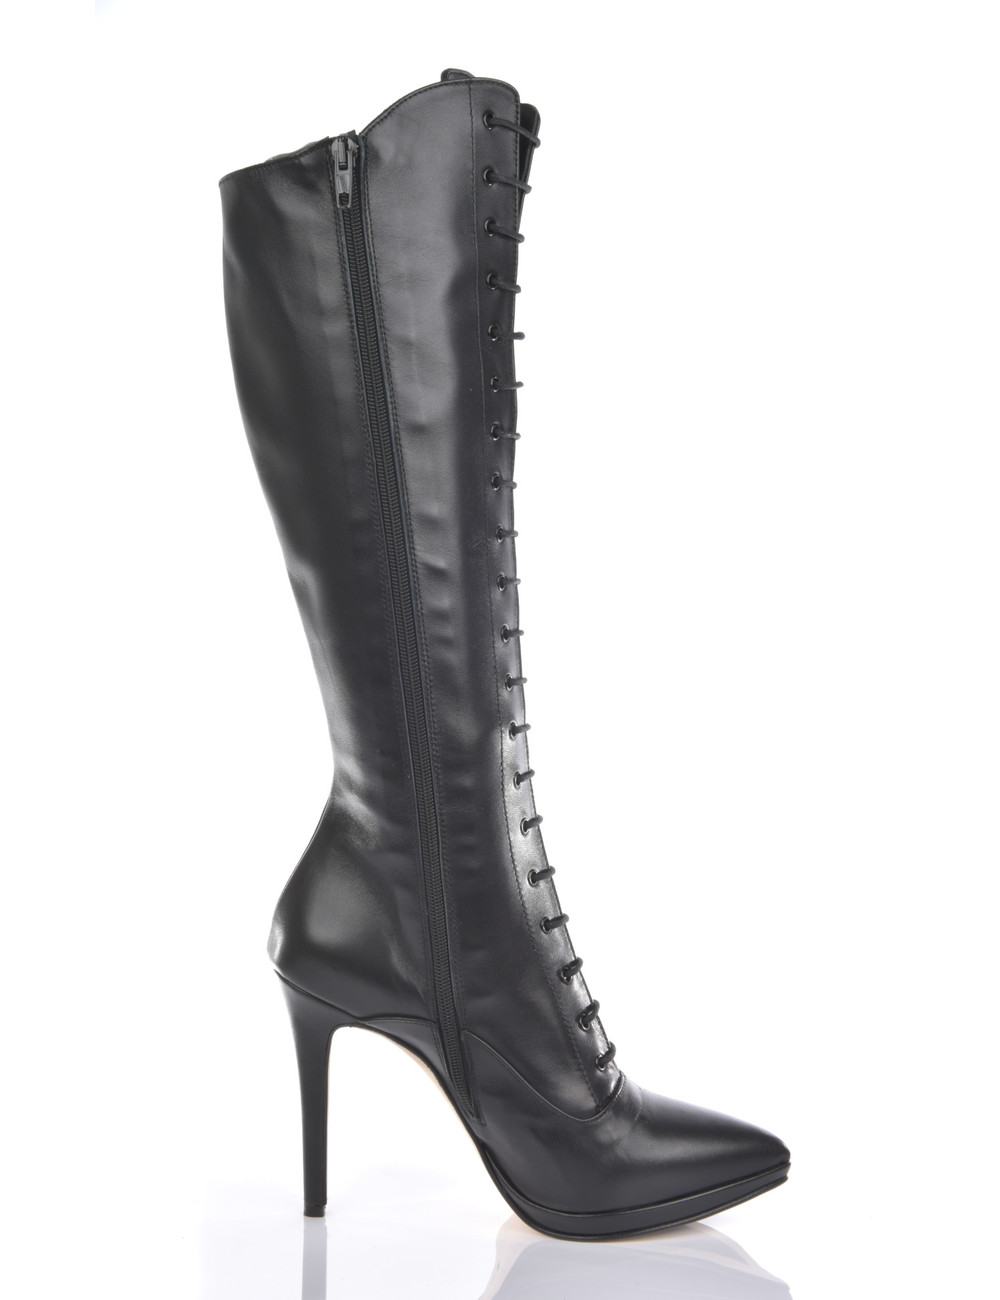 Sanctum High Italian lace-up knee boots JUNO with stiletto heels in genuine leather